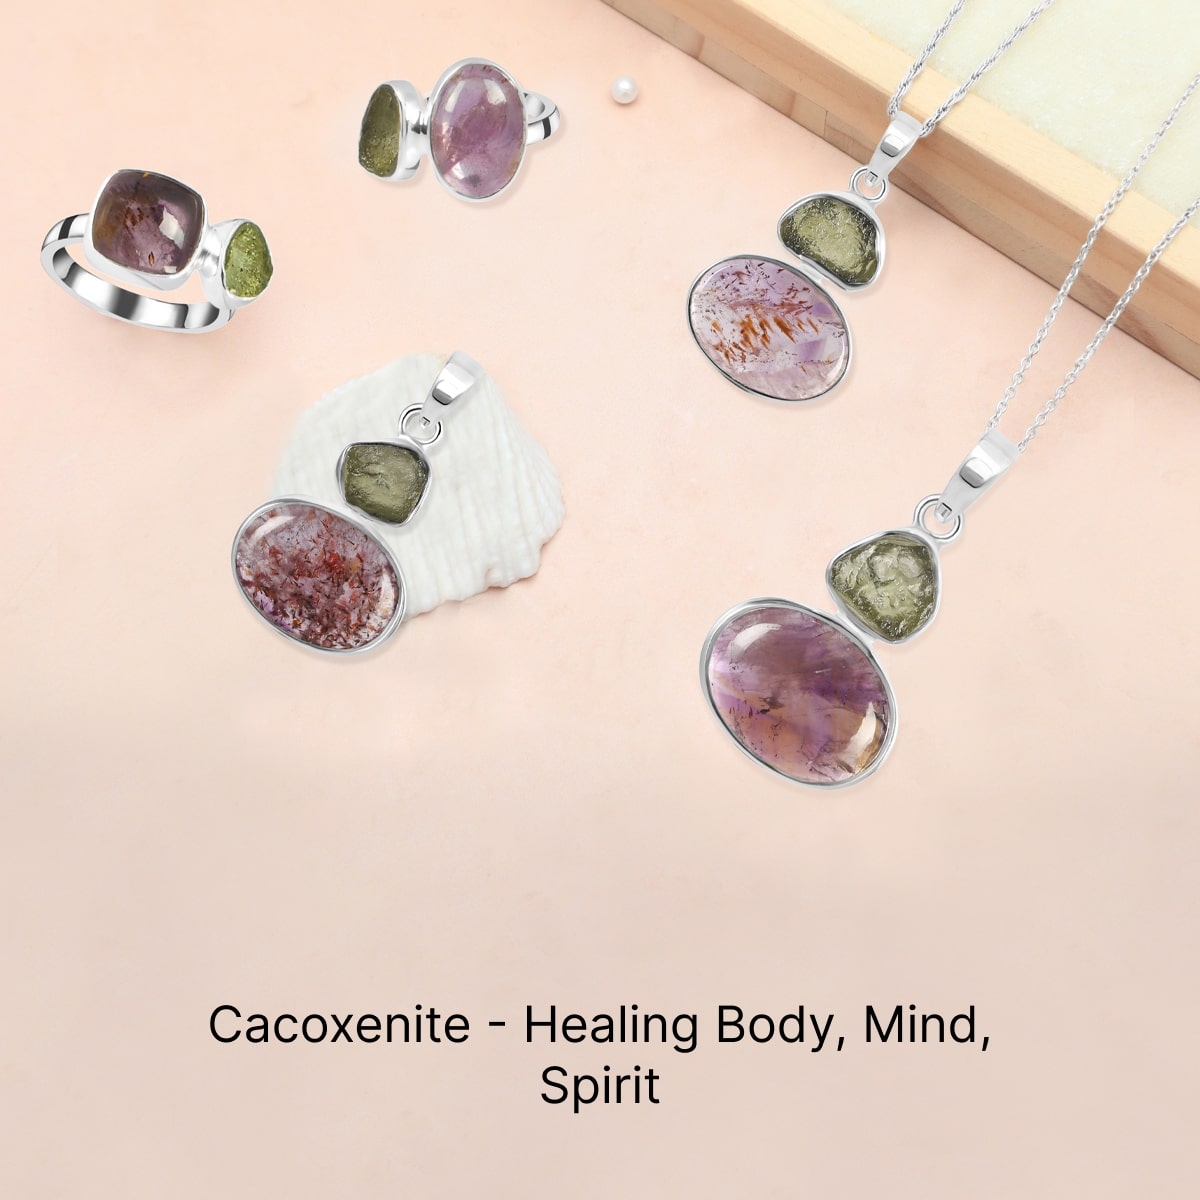 Physical Healing properties of Cacoxenite